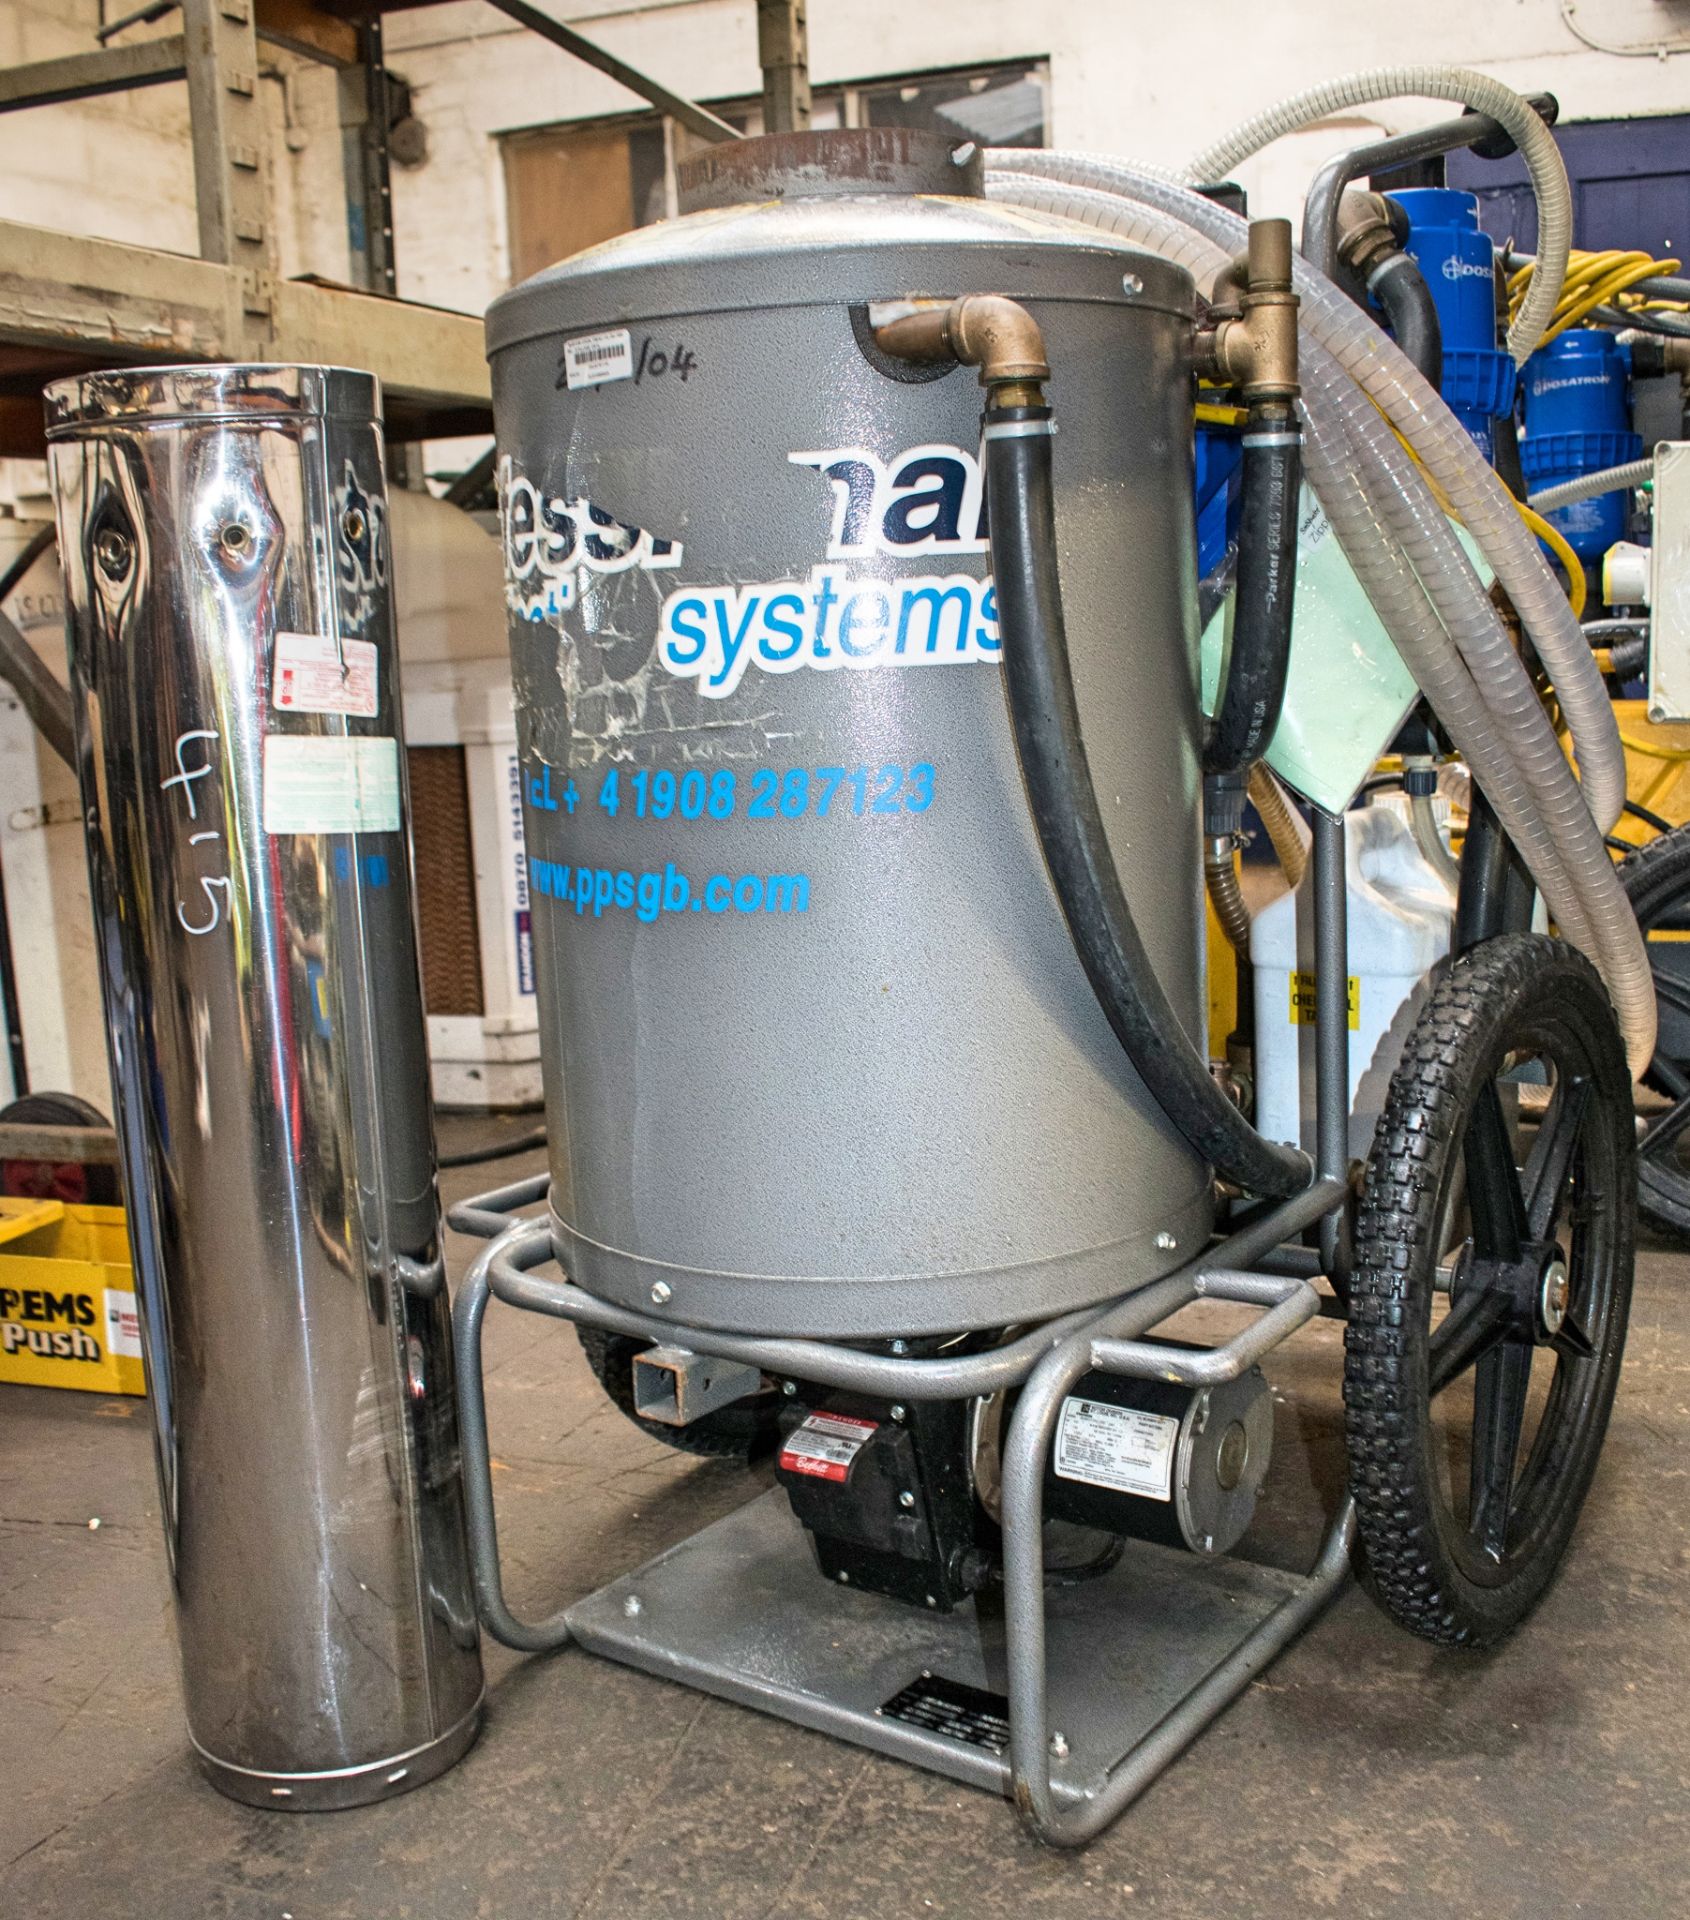 Diesel fuelled chemical decontamination personnel washer c/w flue ** Ex Fire and Rescue service**